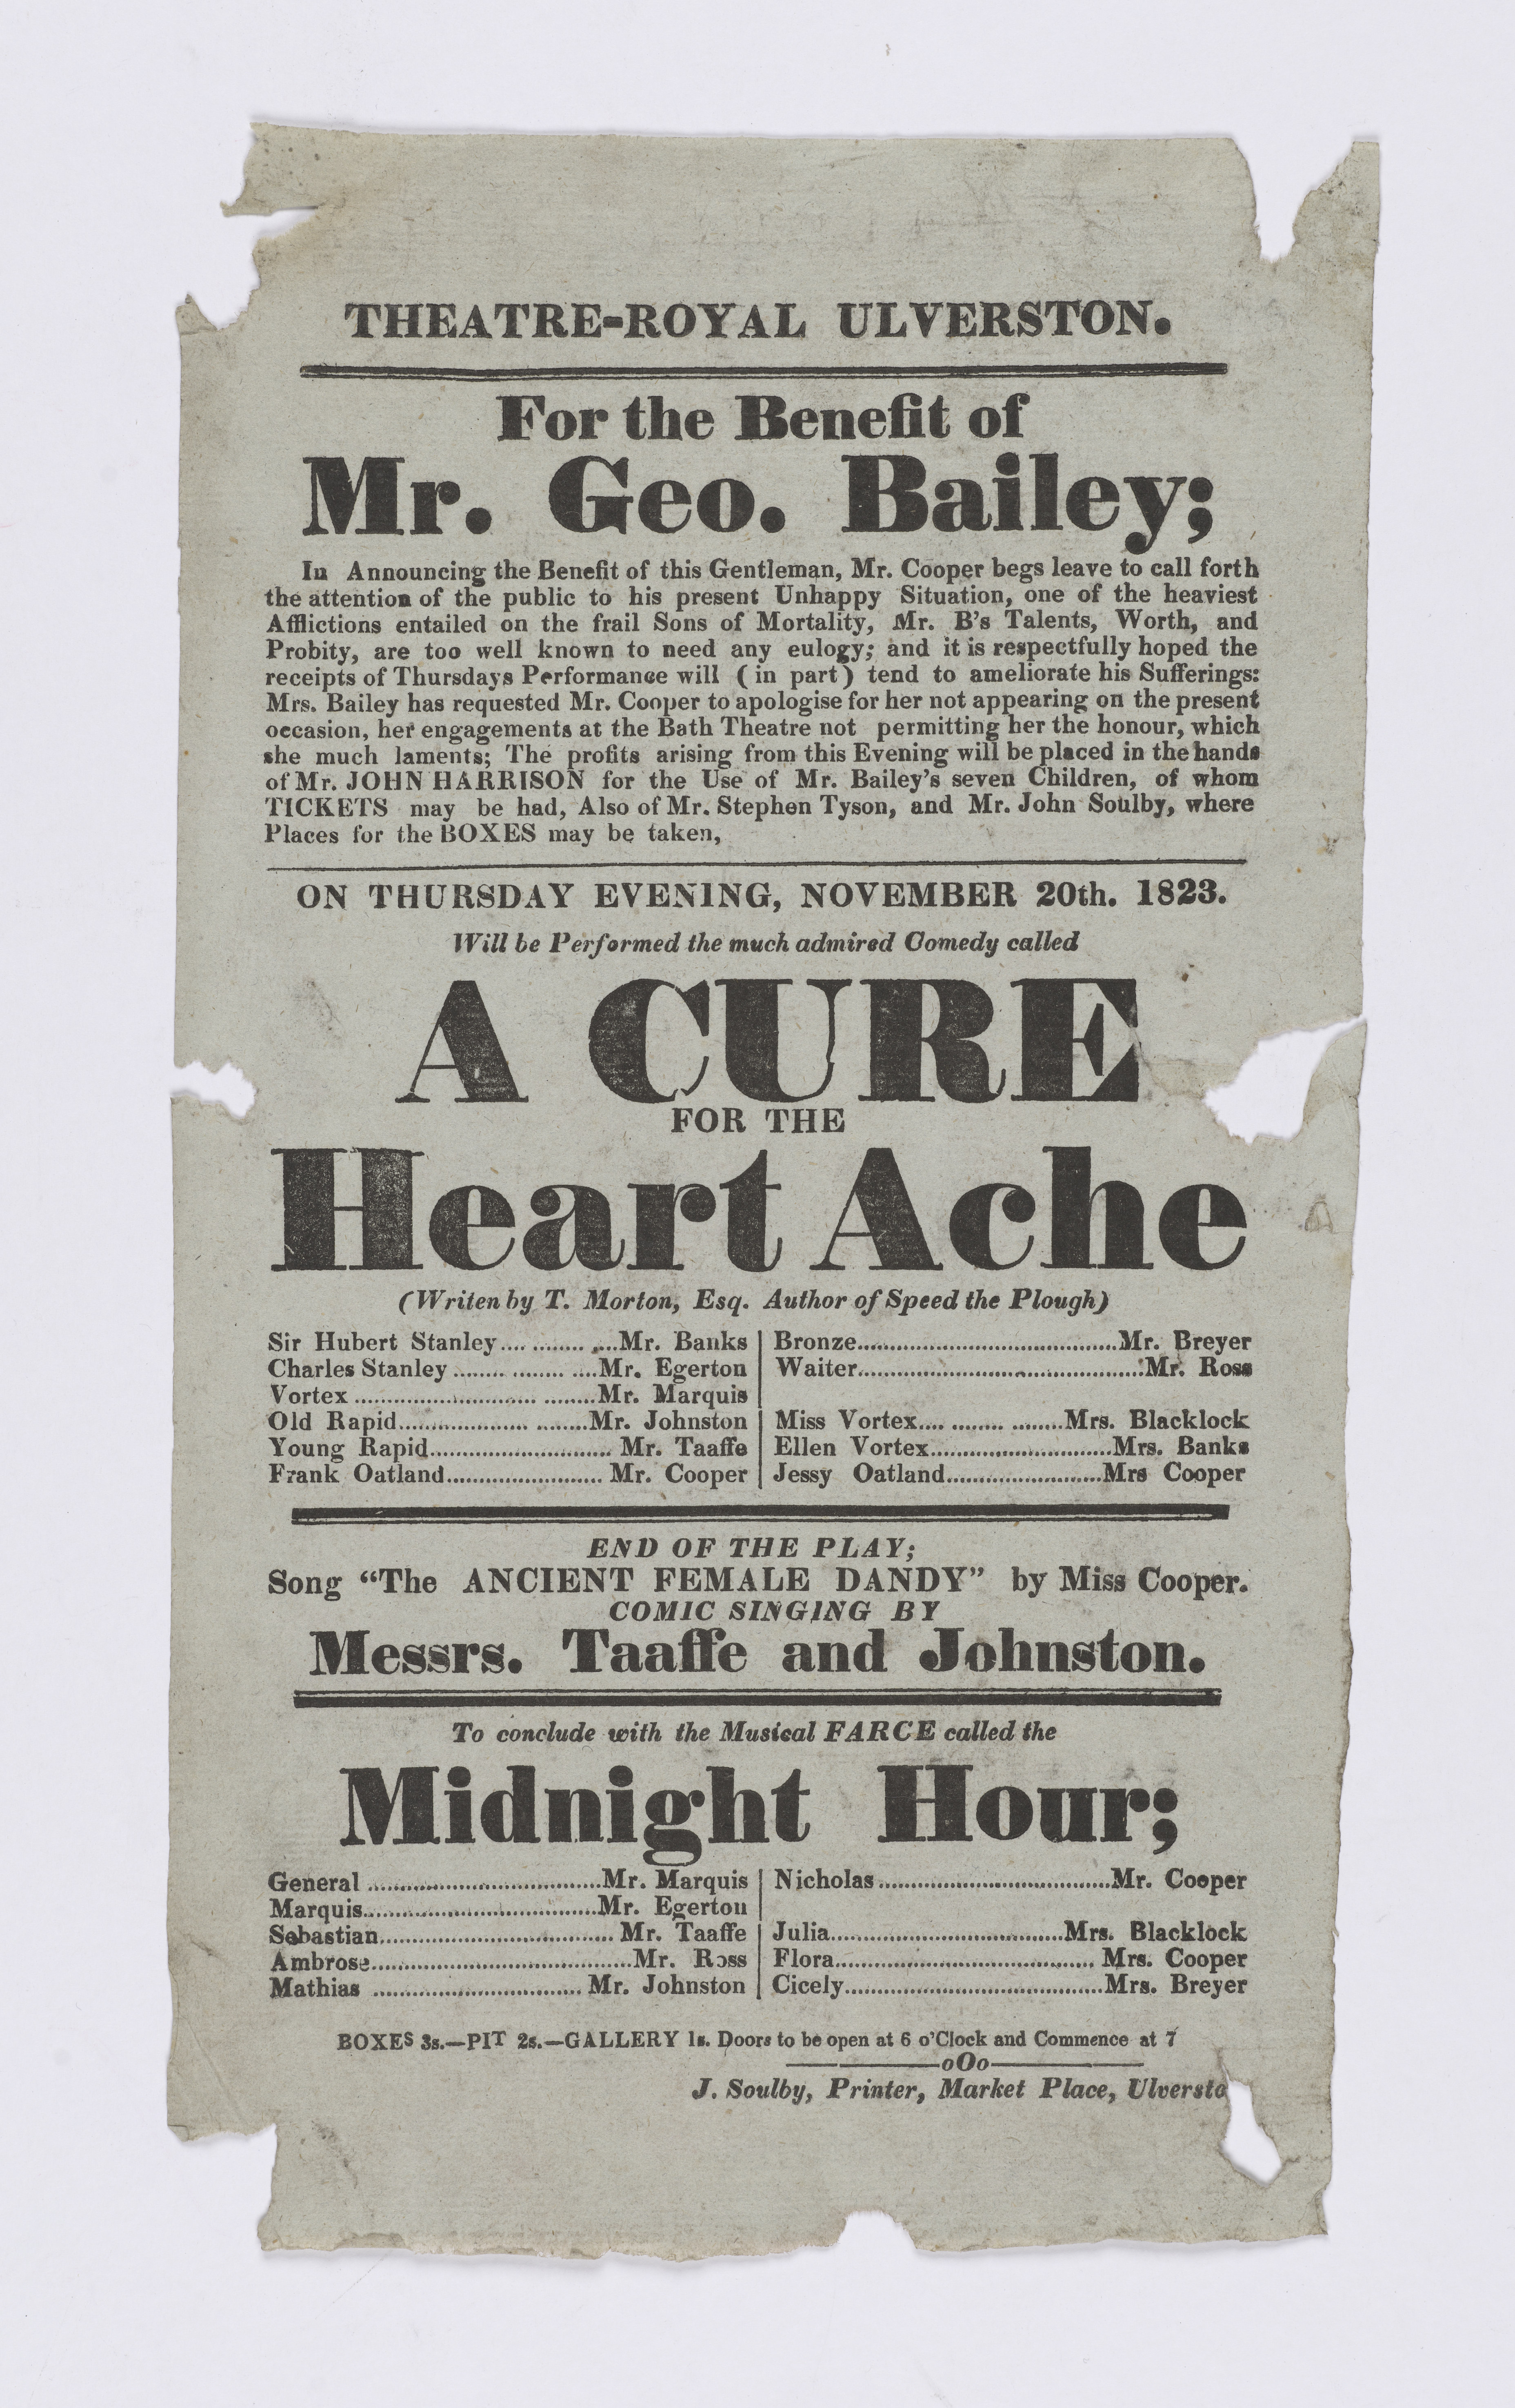 Theatre playbill with text describing a performance of A Cure for the Heart Ache in 1823 at the Theatre Royal in Ulverston